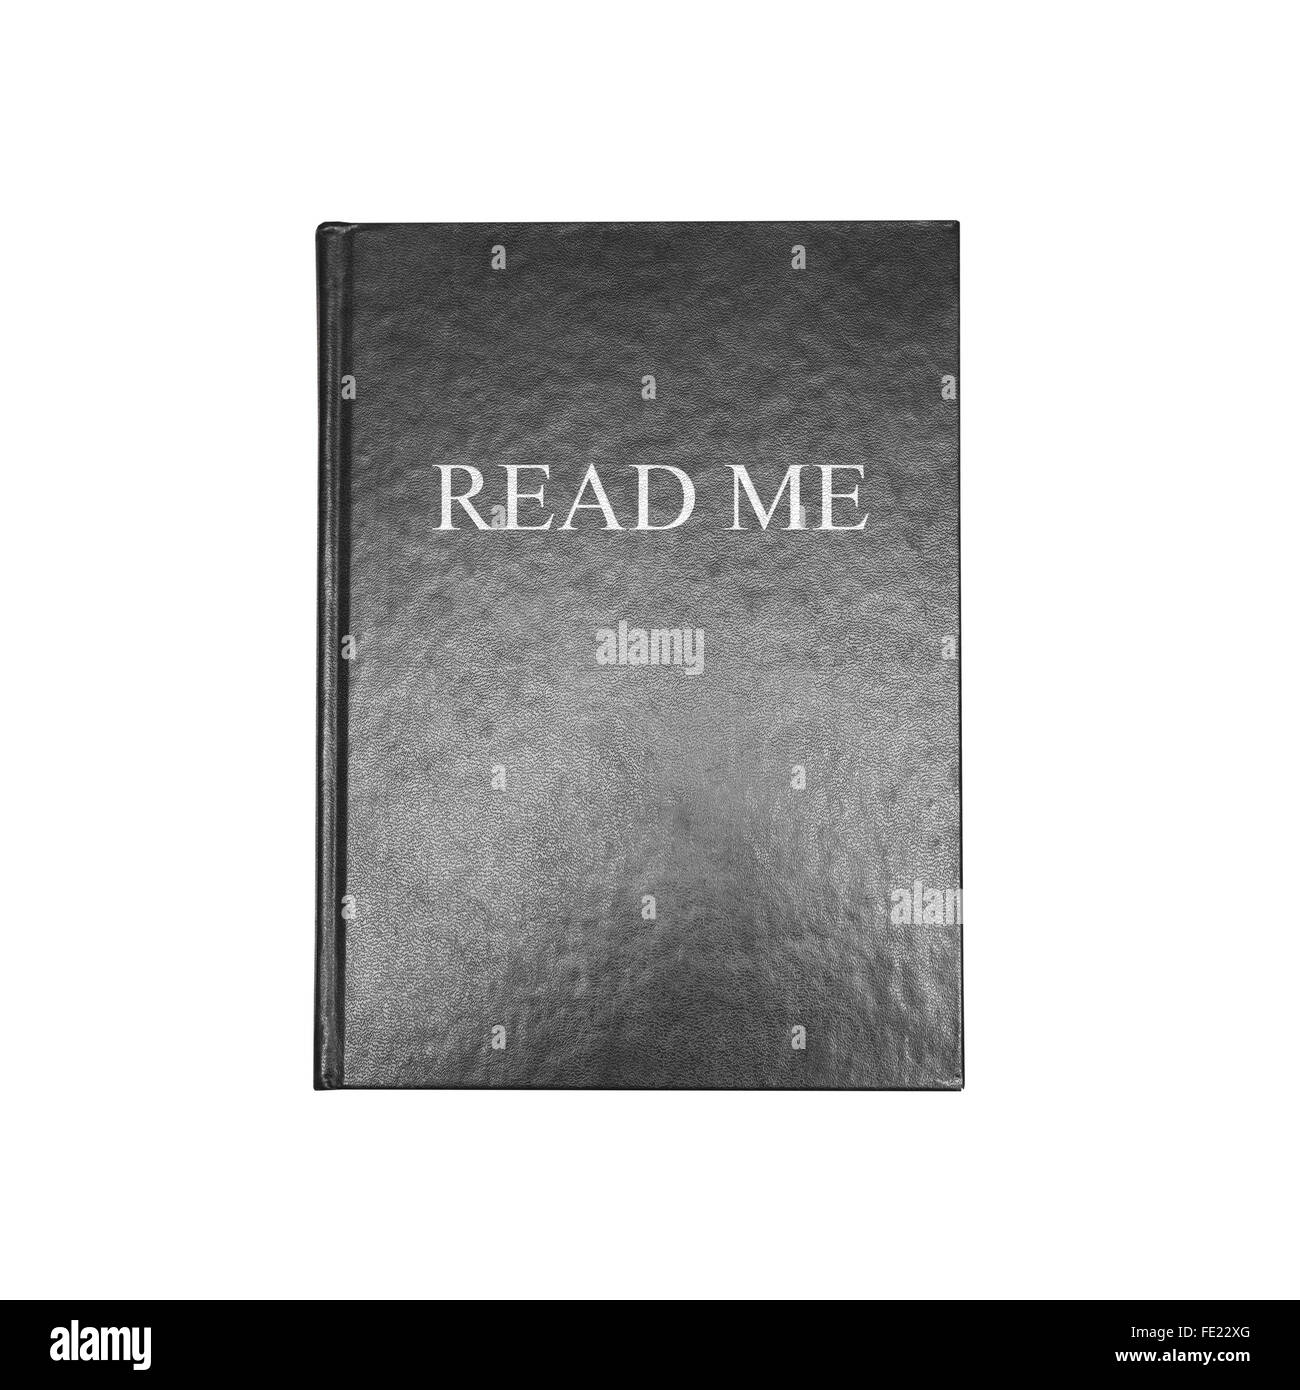 Read me manual. Book with empty black leather cover isolated on white background Stock Photo